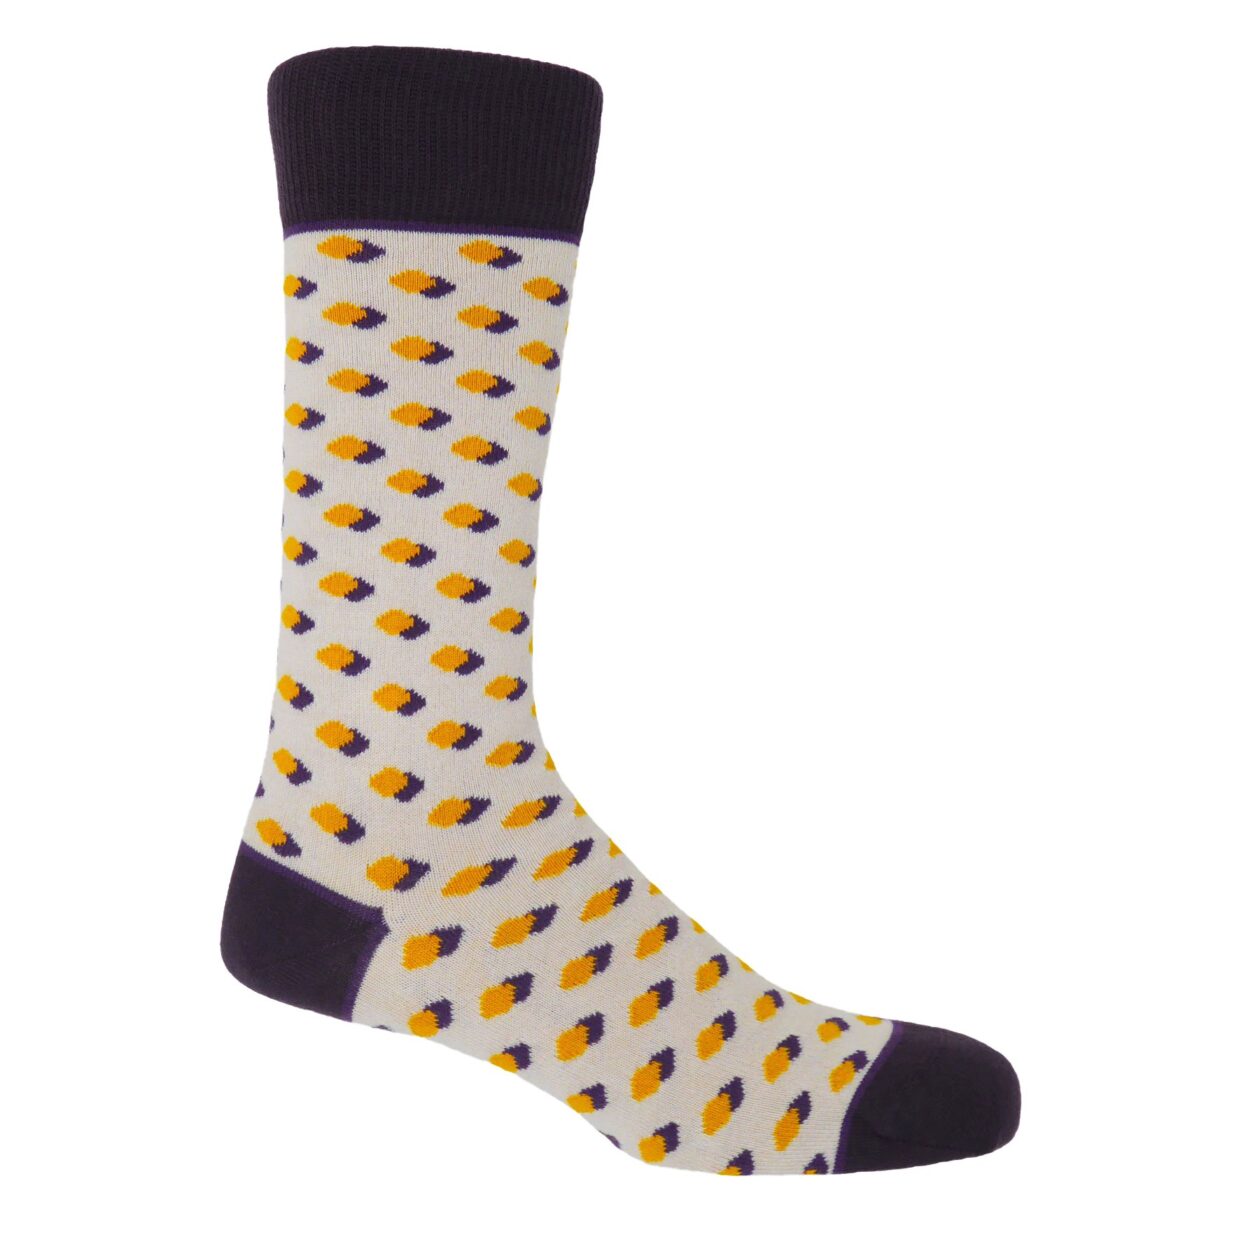 Peper Harow. Highest Quality socks. Traditional and Modern.Disruptiuon/Equilibrium